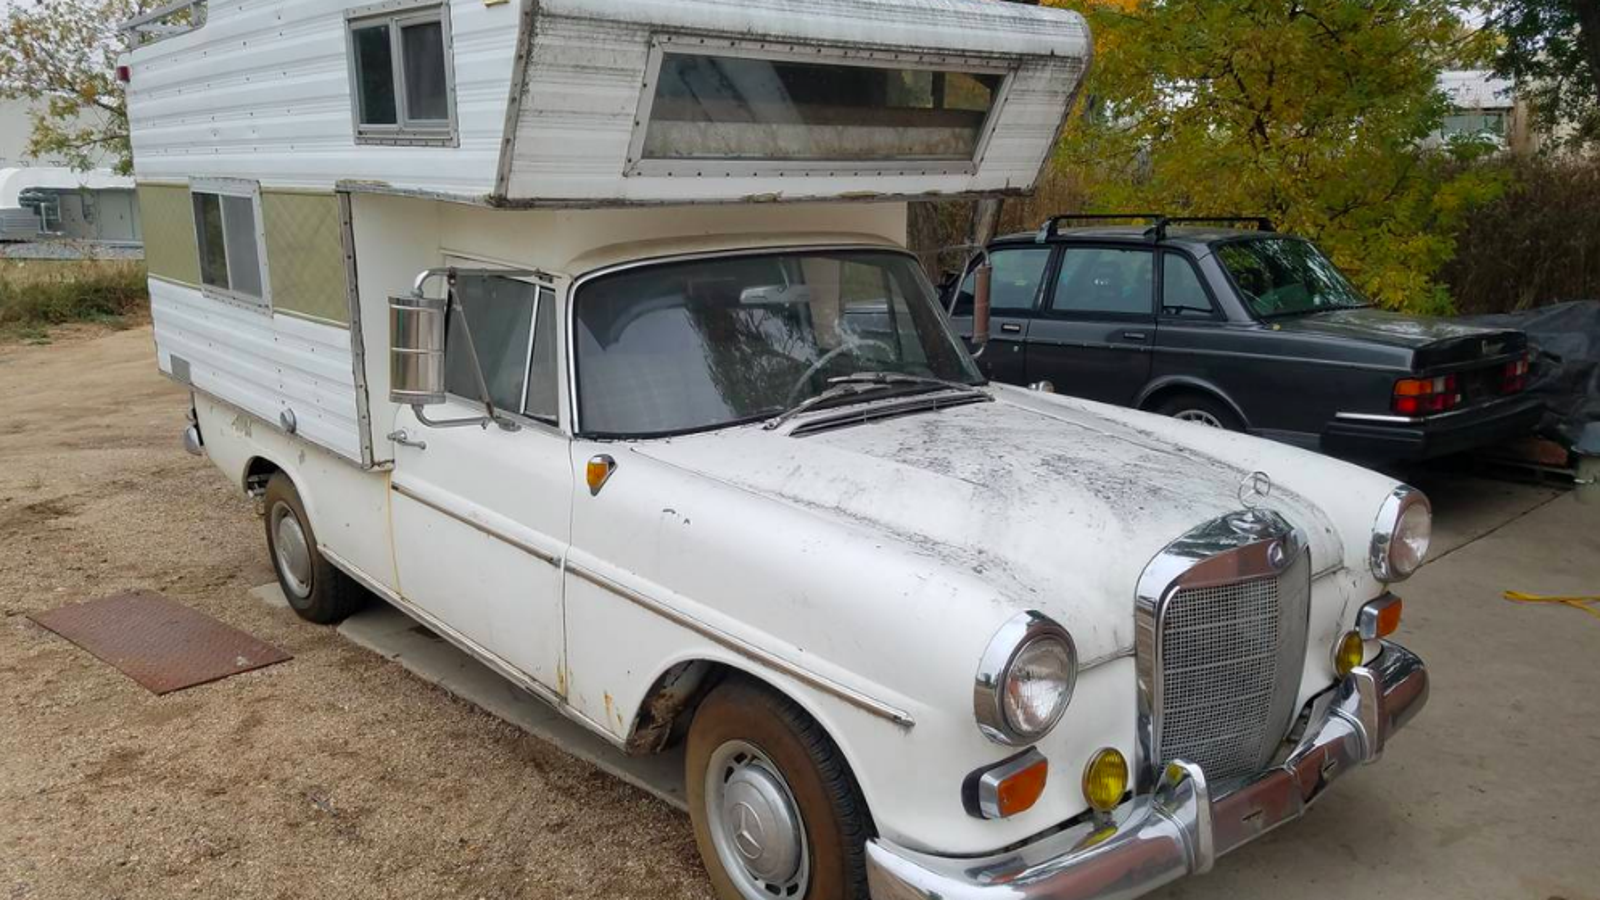 This Mercedes 190D Camper For Sale on Craigslist May Be ...